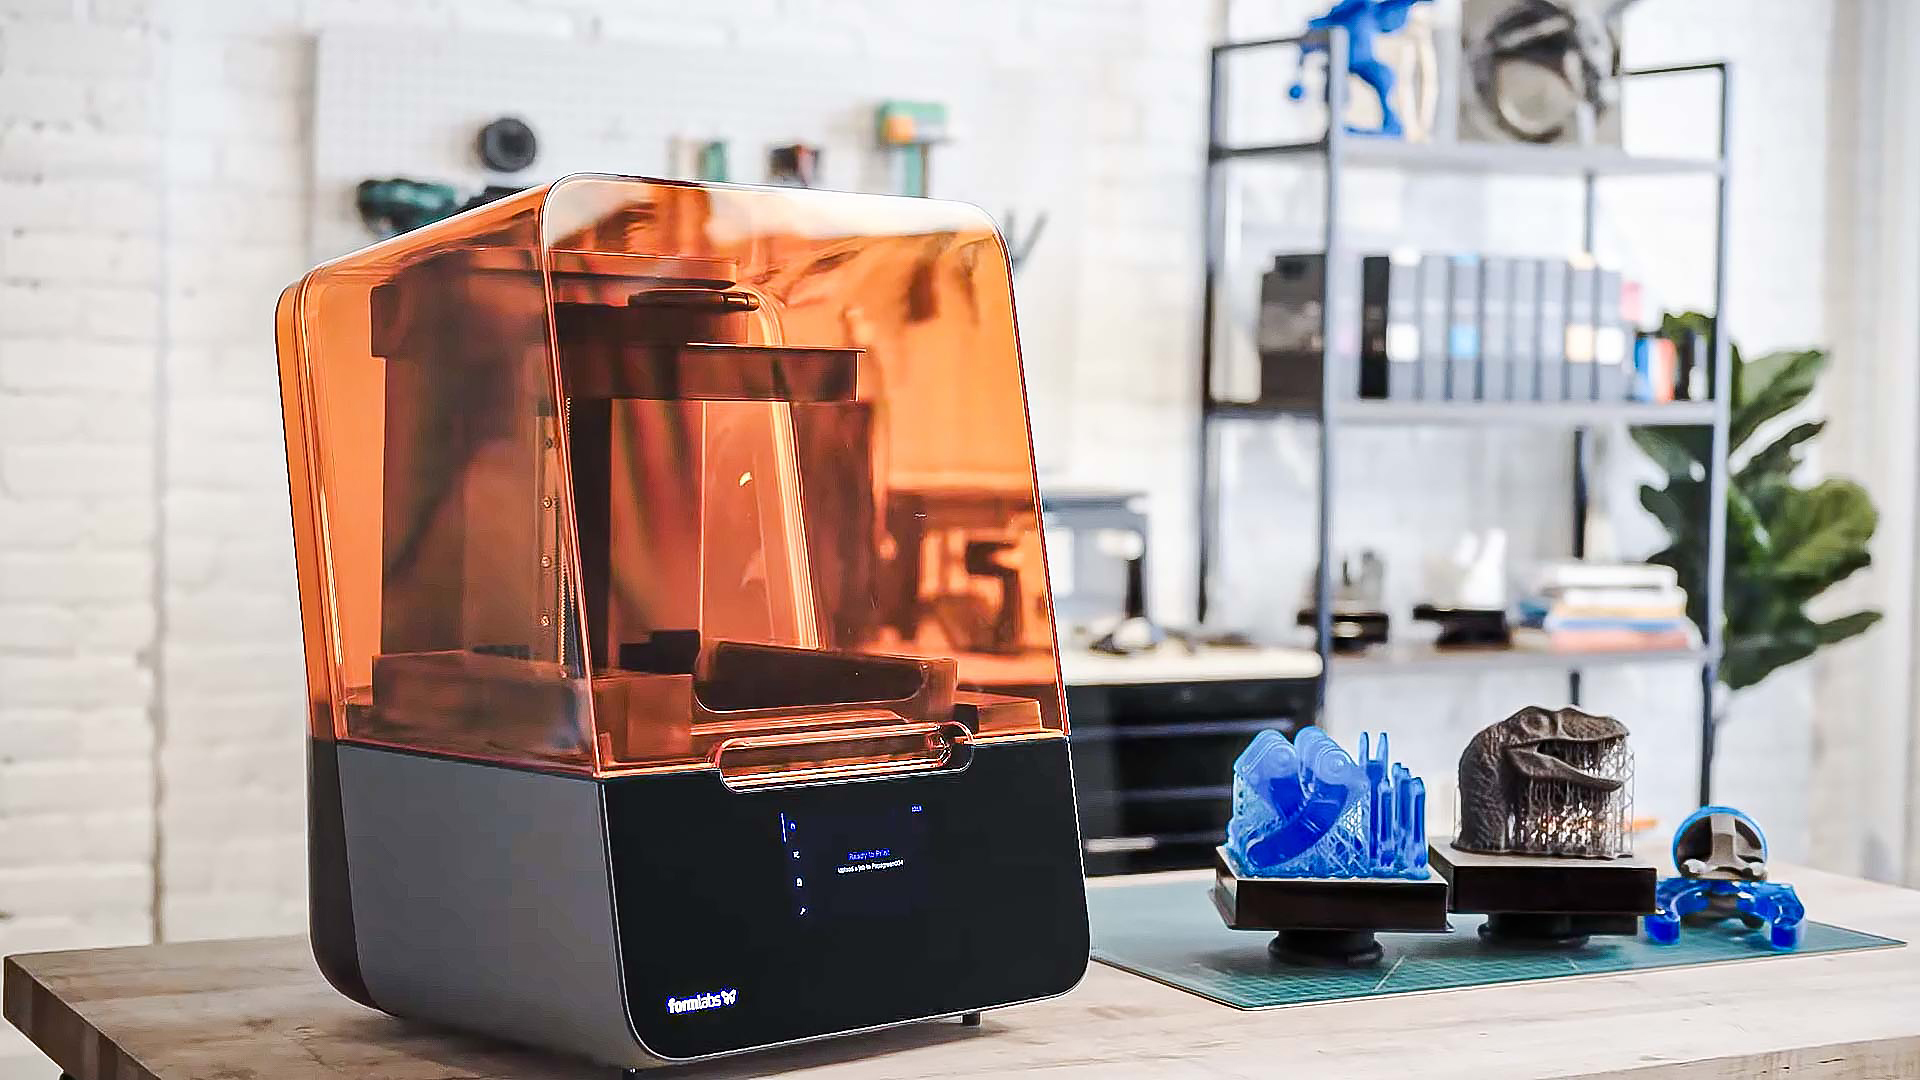 Formlabs Color Kit